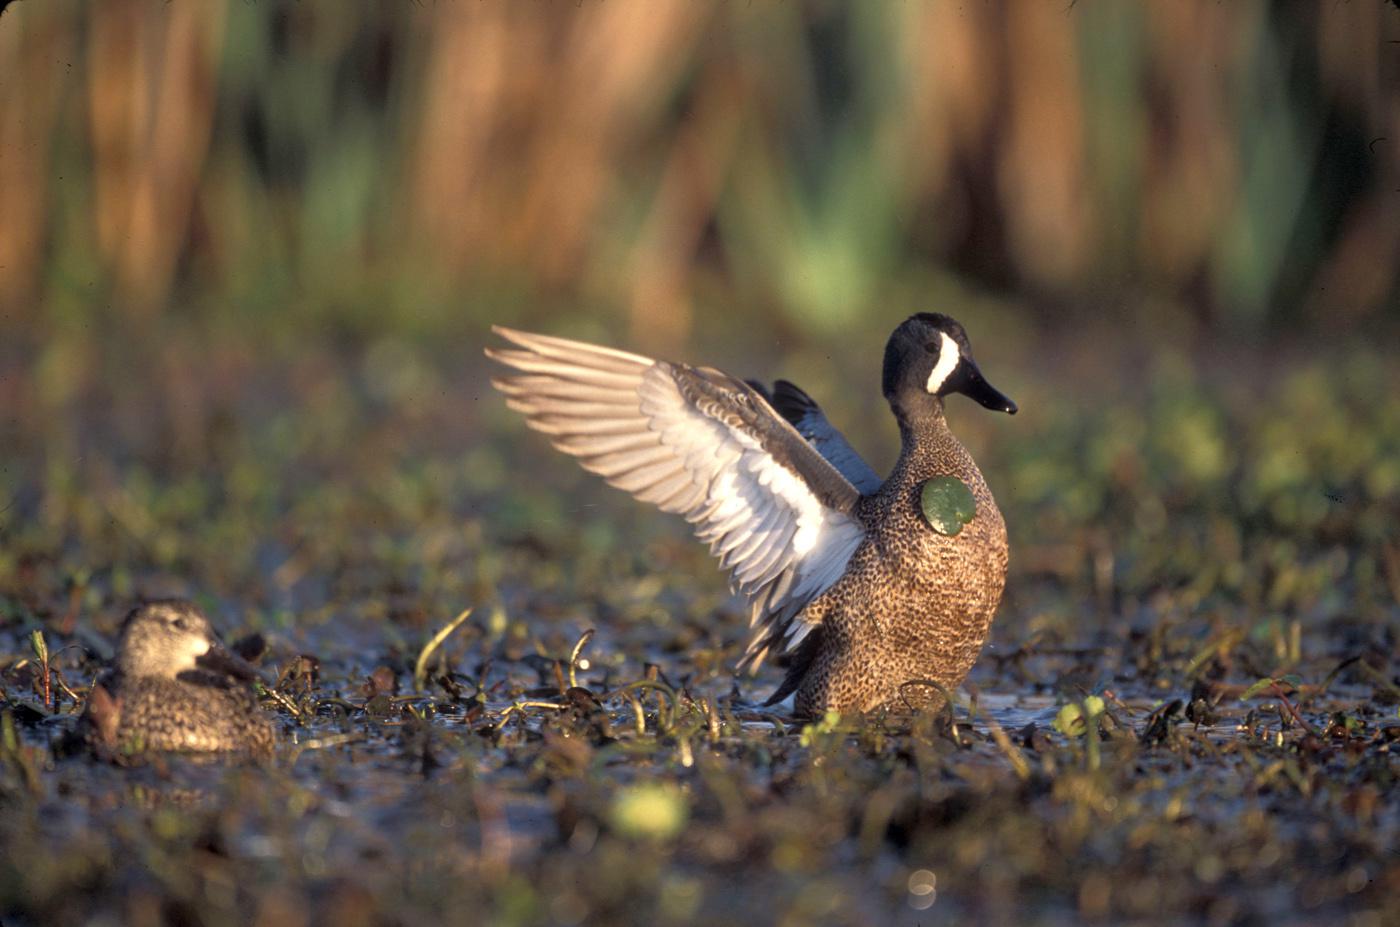 Mississippi State University researchers are gathering inforamtion that will help biologists and managers determine where and when habitats should be made available for migrating and wintering ducks. (Photo by Joe Mac Hudspeth, Jr.)